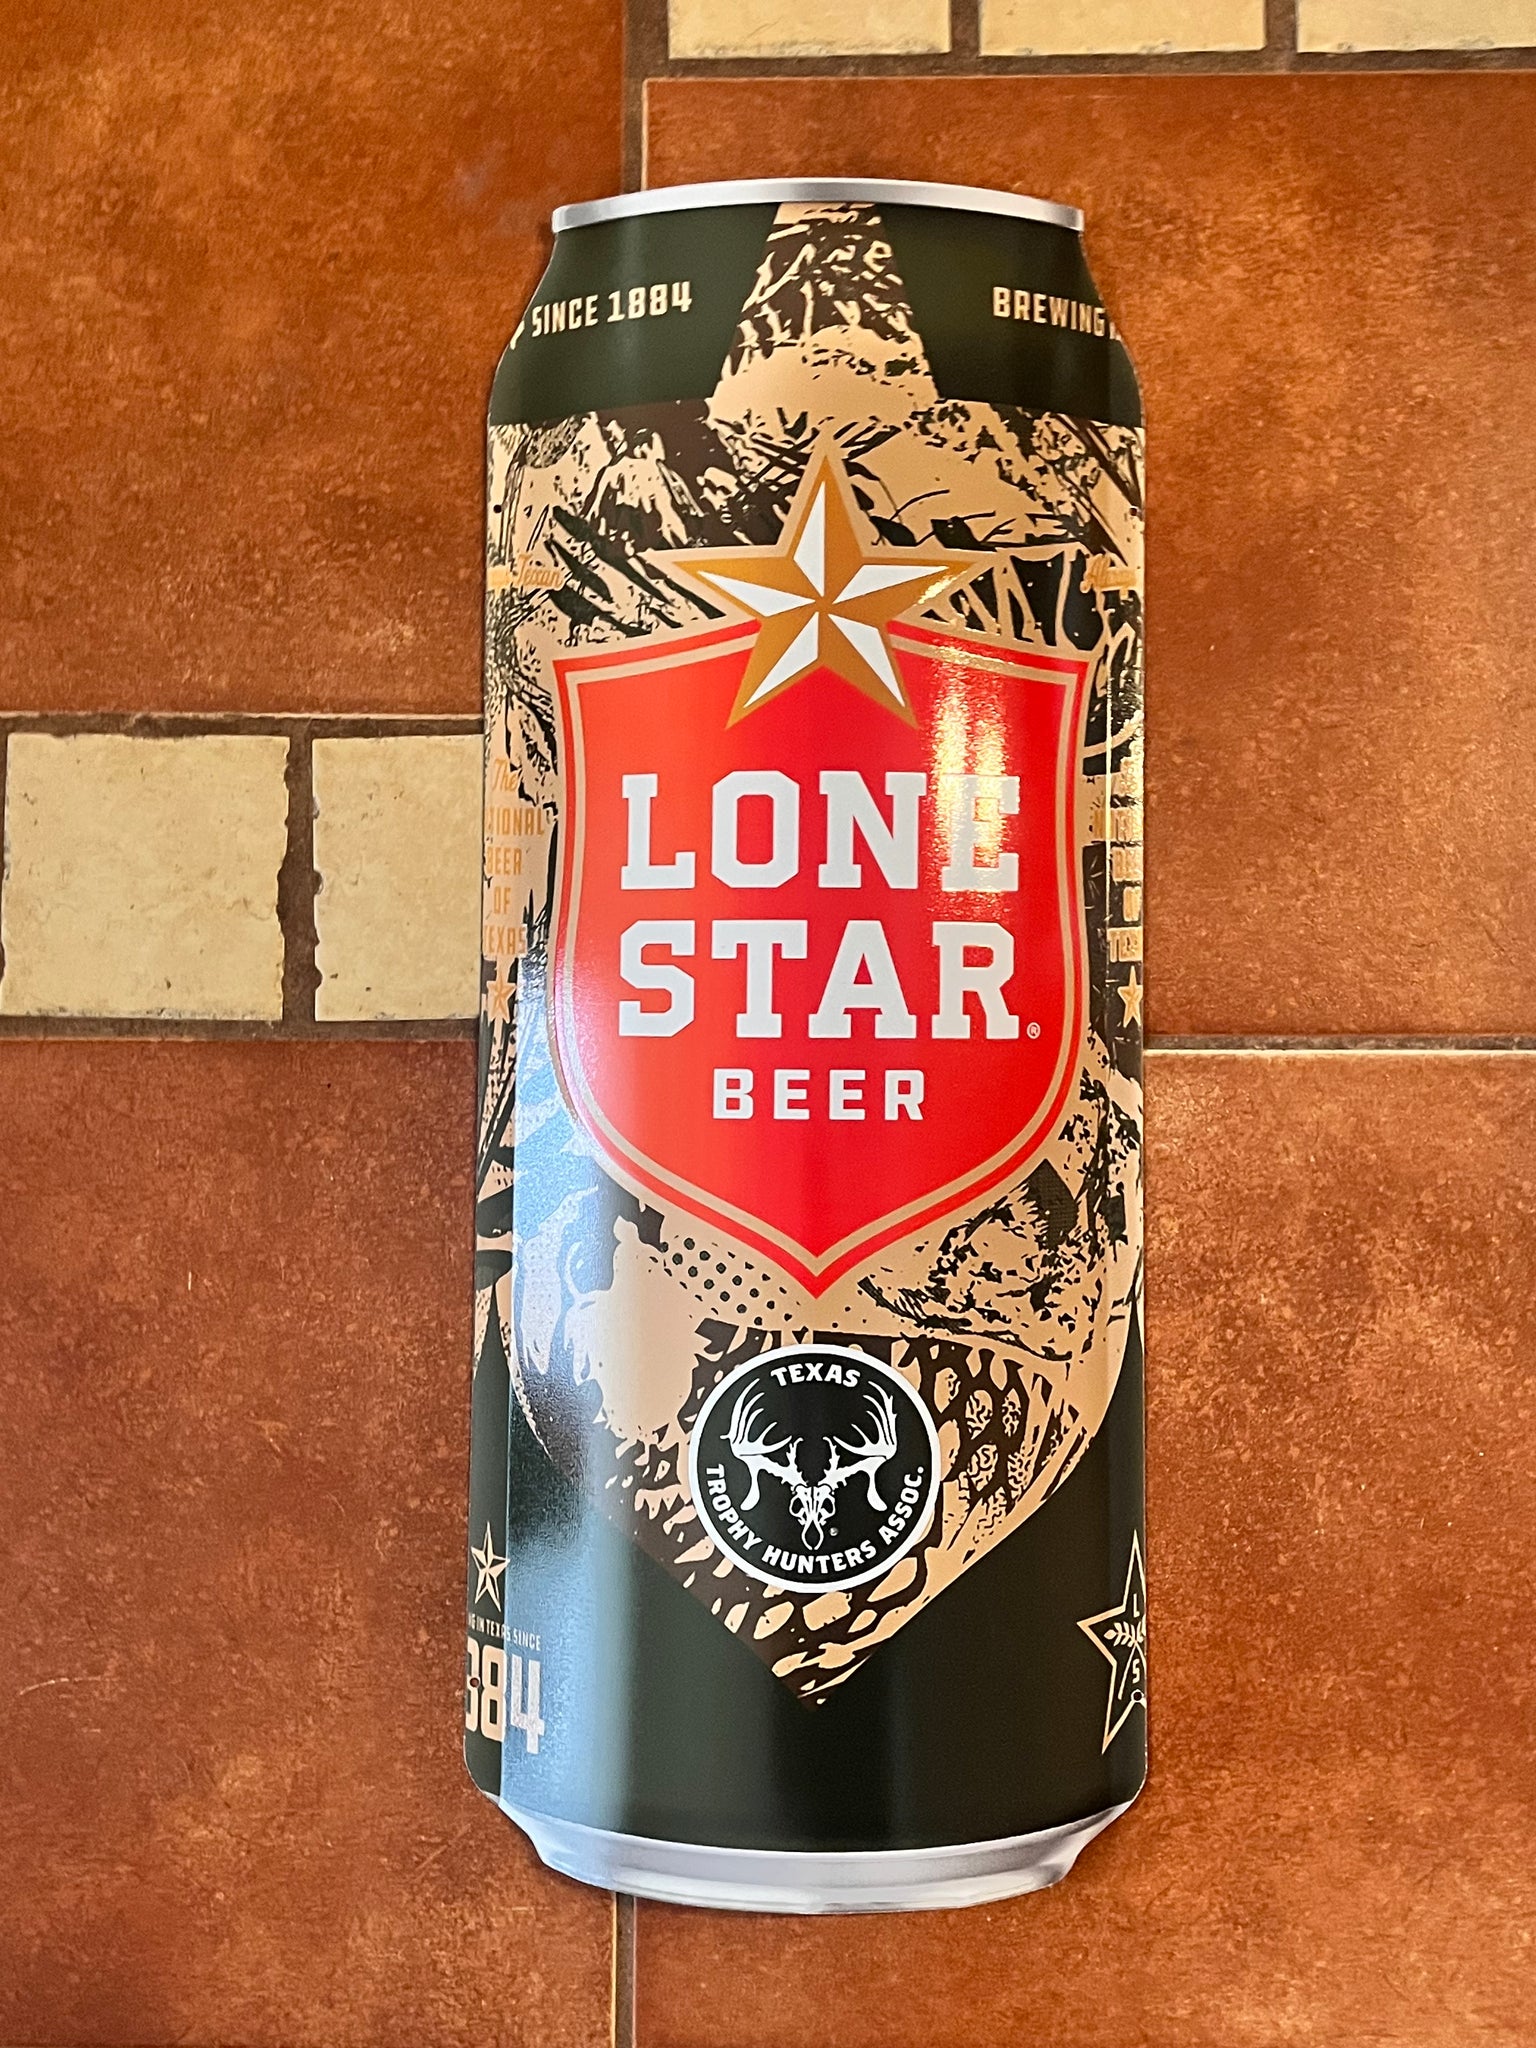 Lone Star Beer X Texas Trophy Hunter’s Association Camo Can Tacker Sign